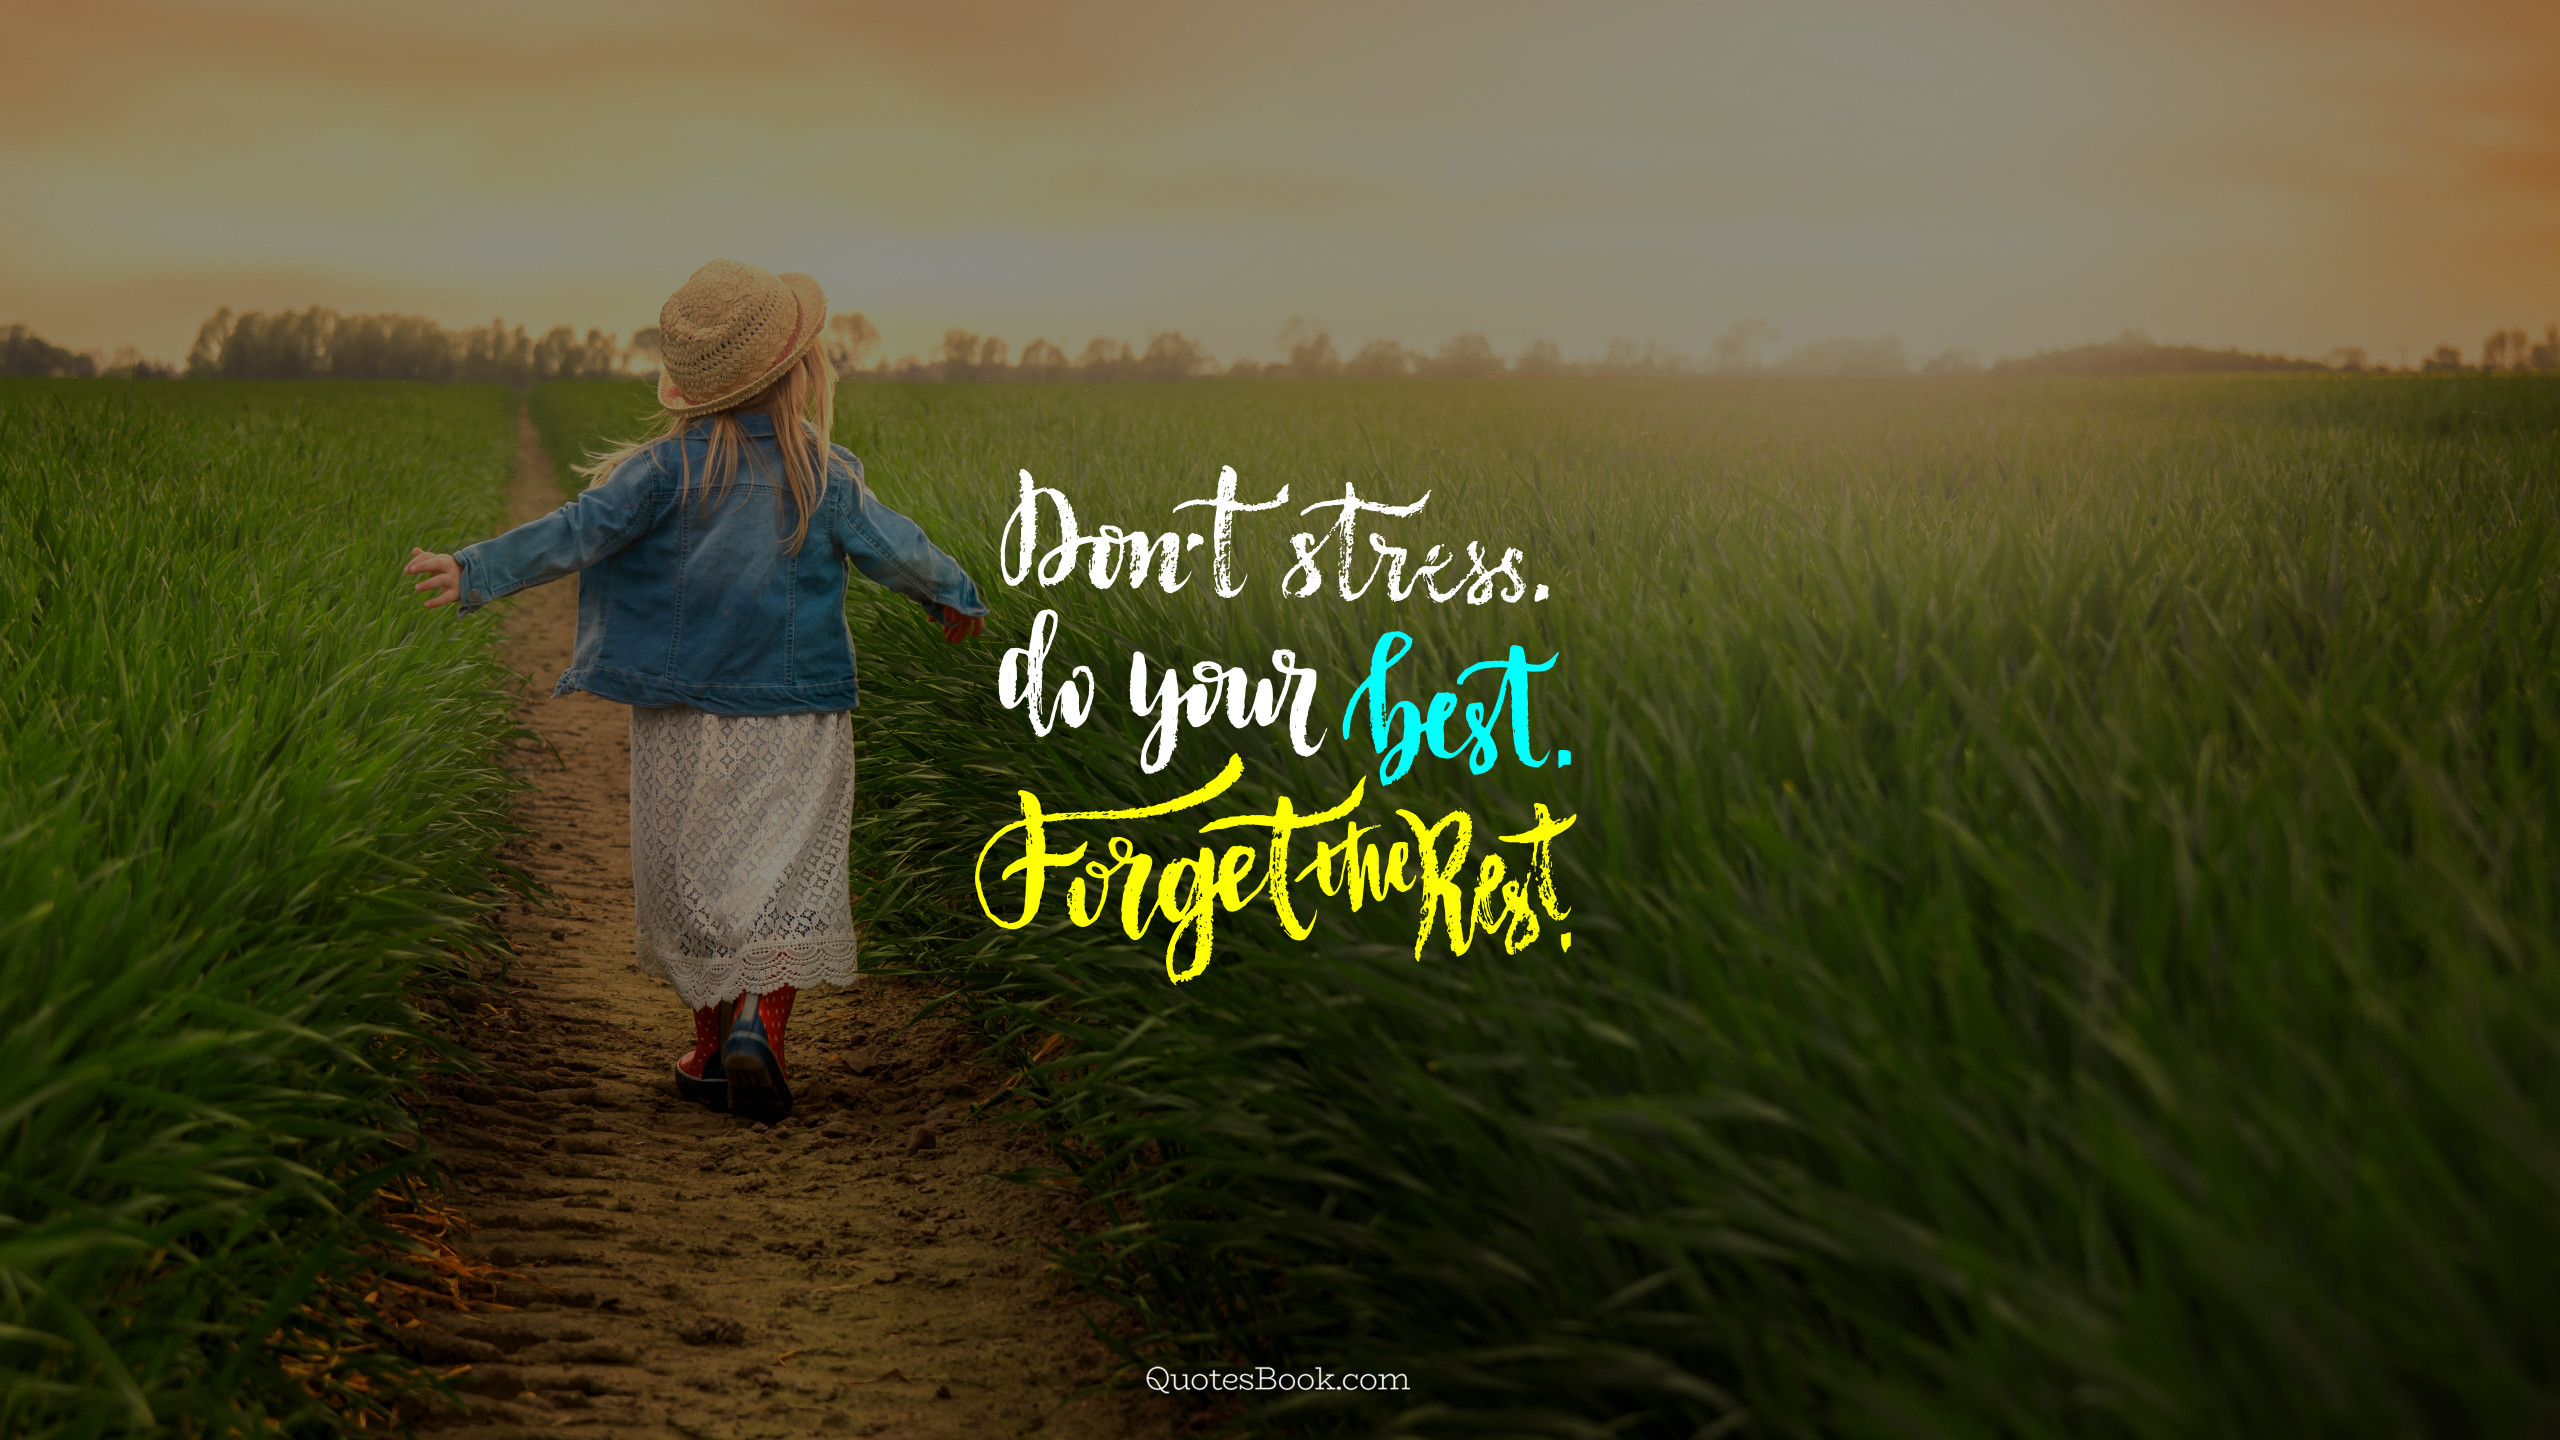 Don't stress. Do your best. Forget the rest - QuotesBook